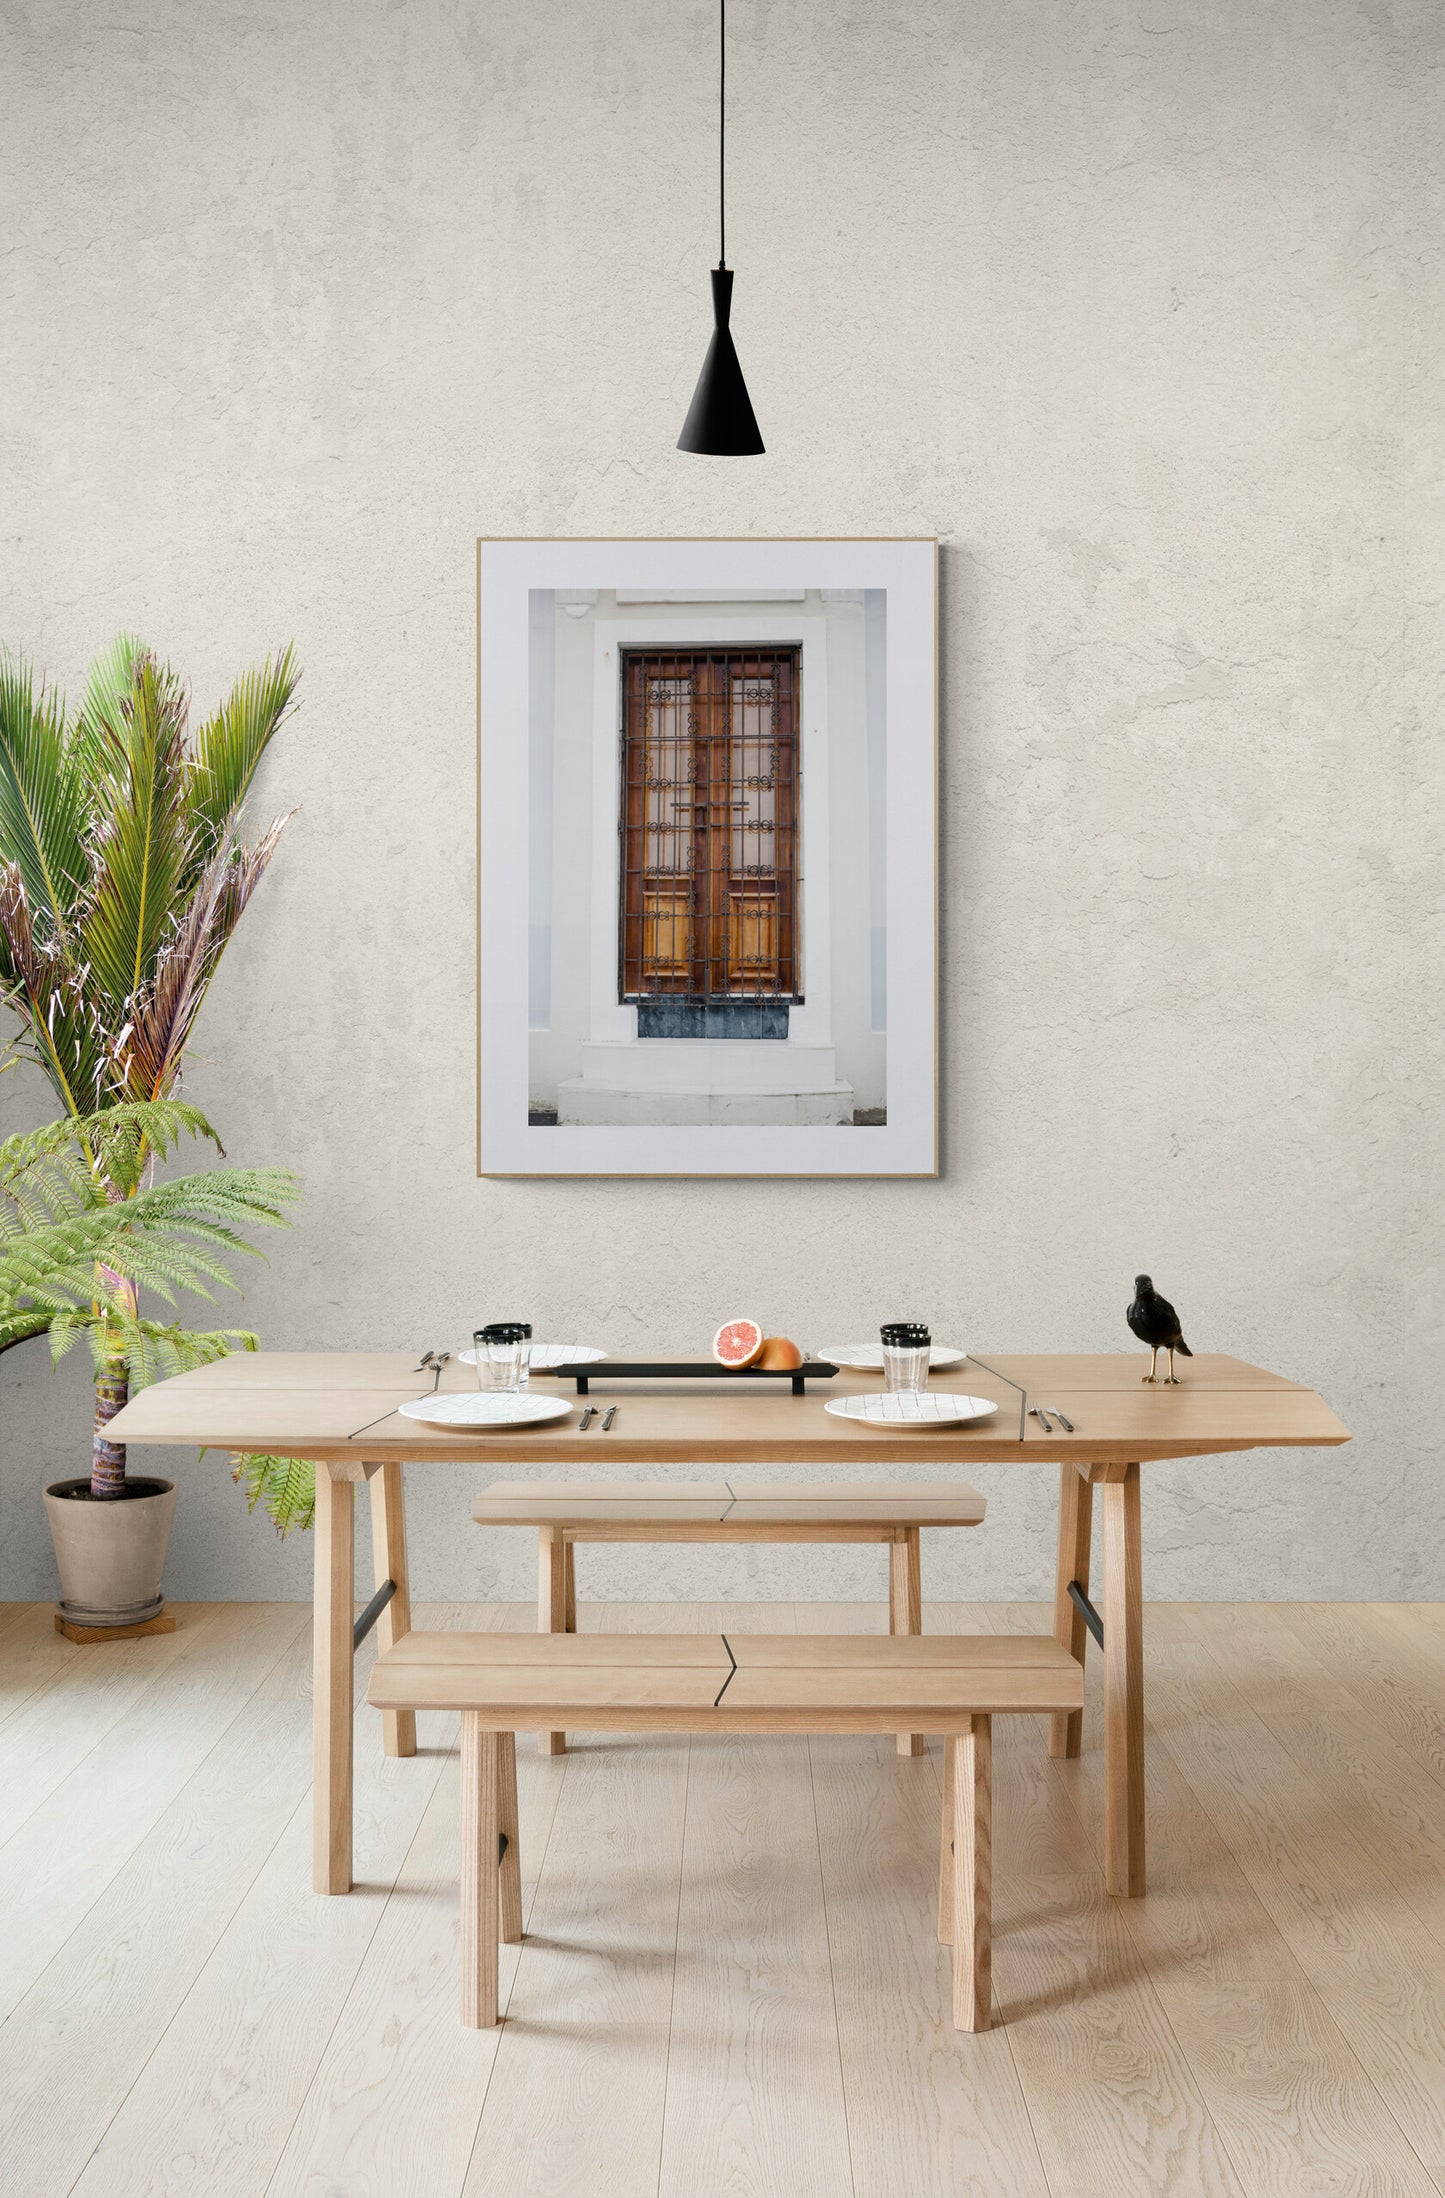 Old San Juan Puerto Rico Door Photograph Print as wall art in a kitchen and dining room